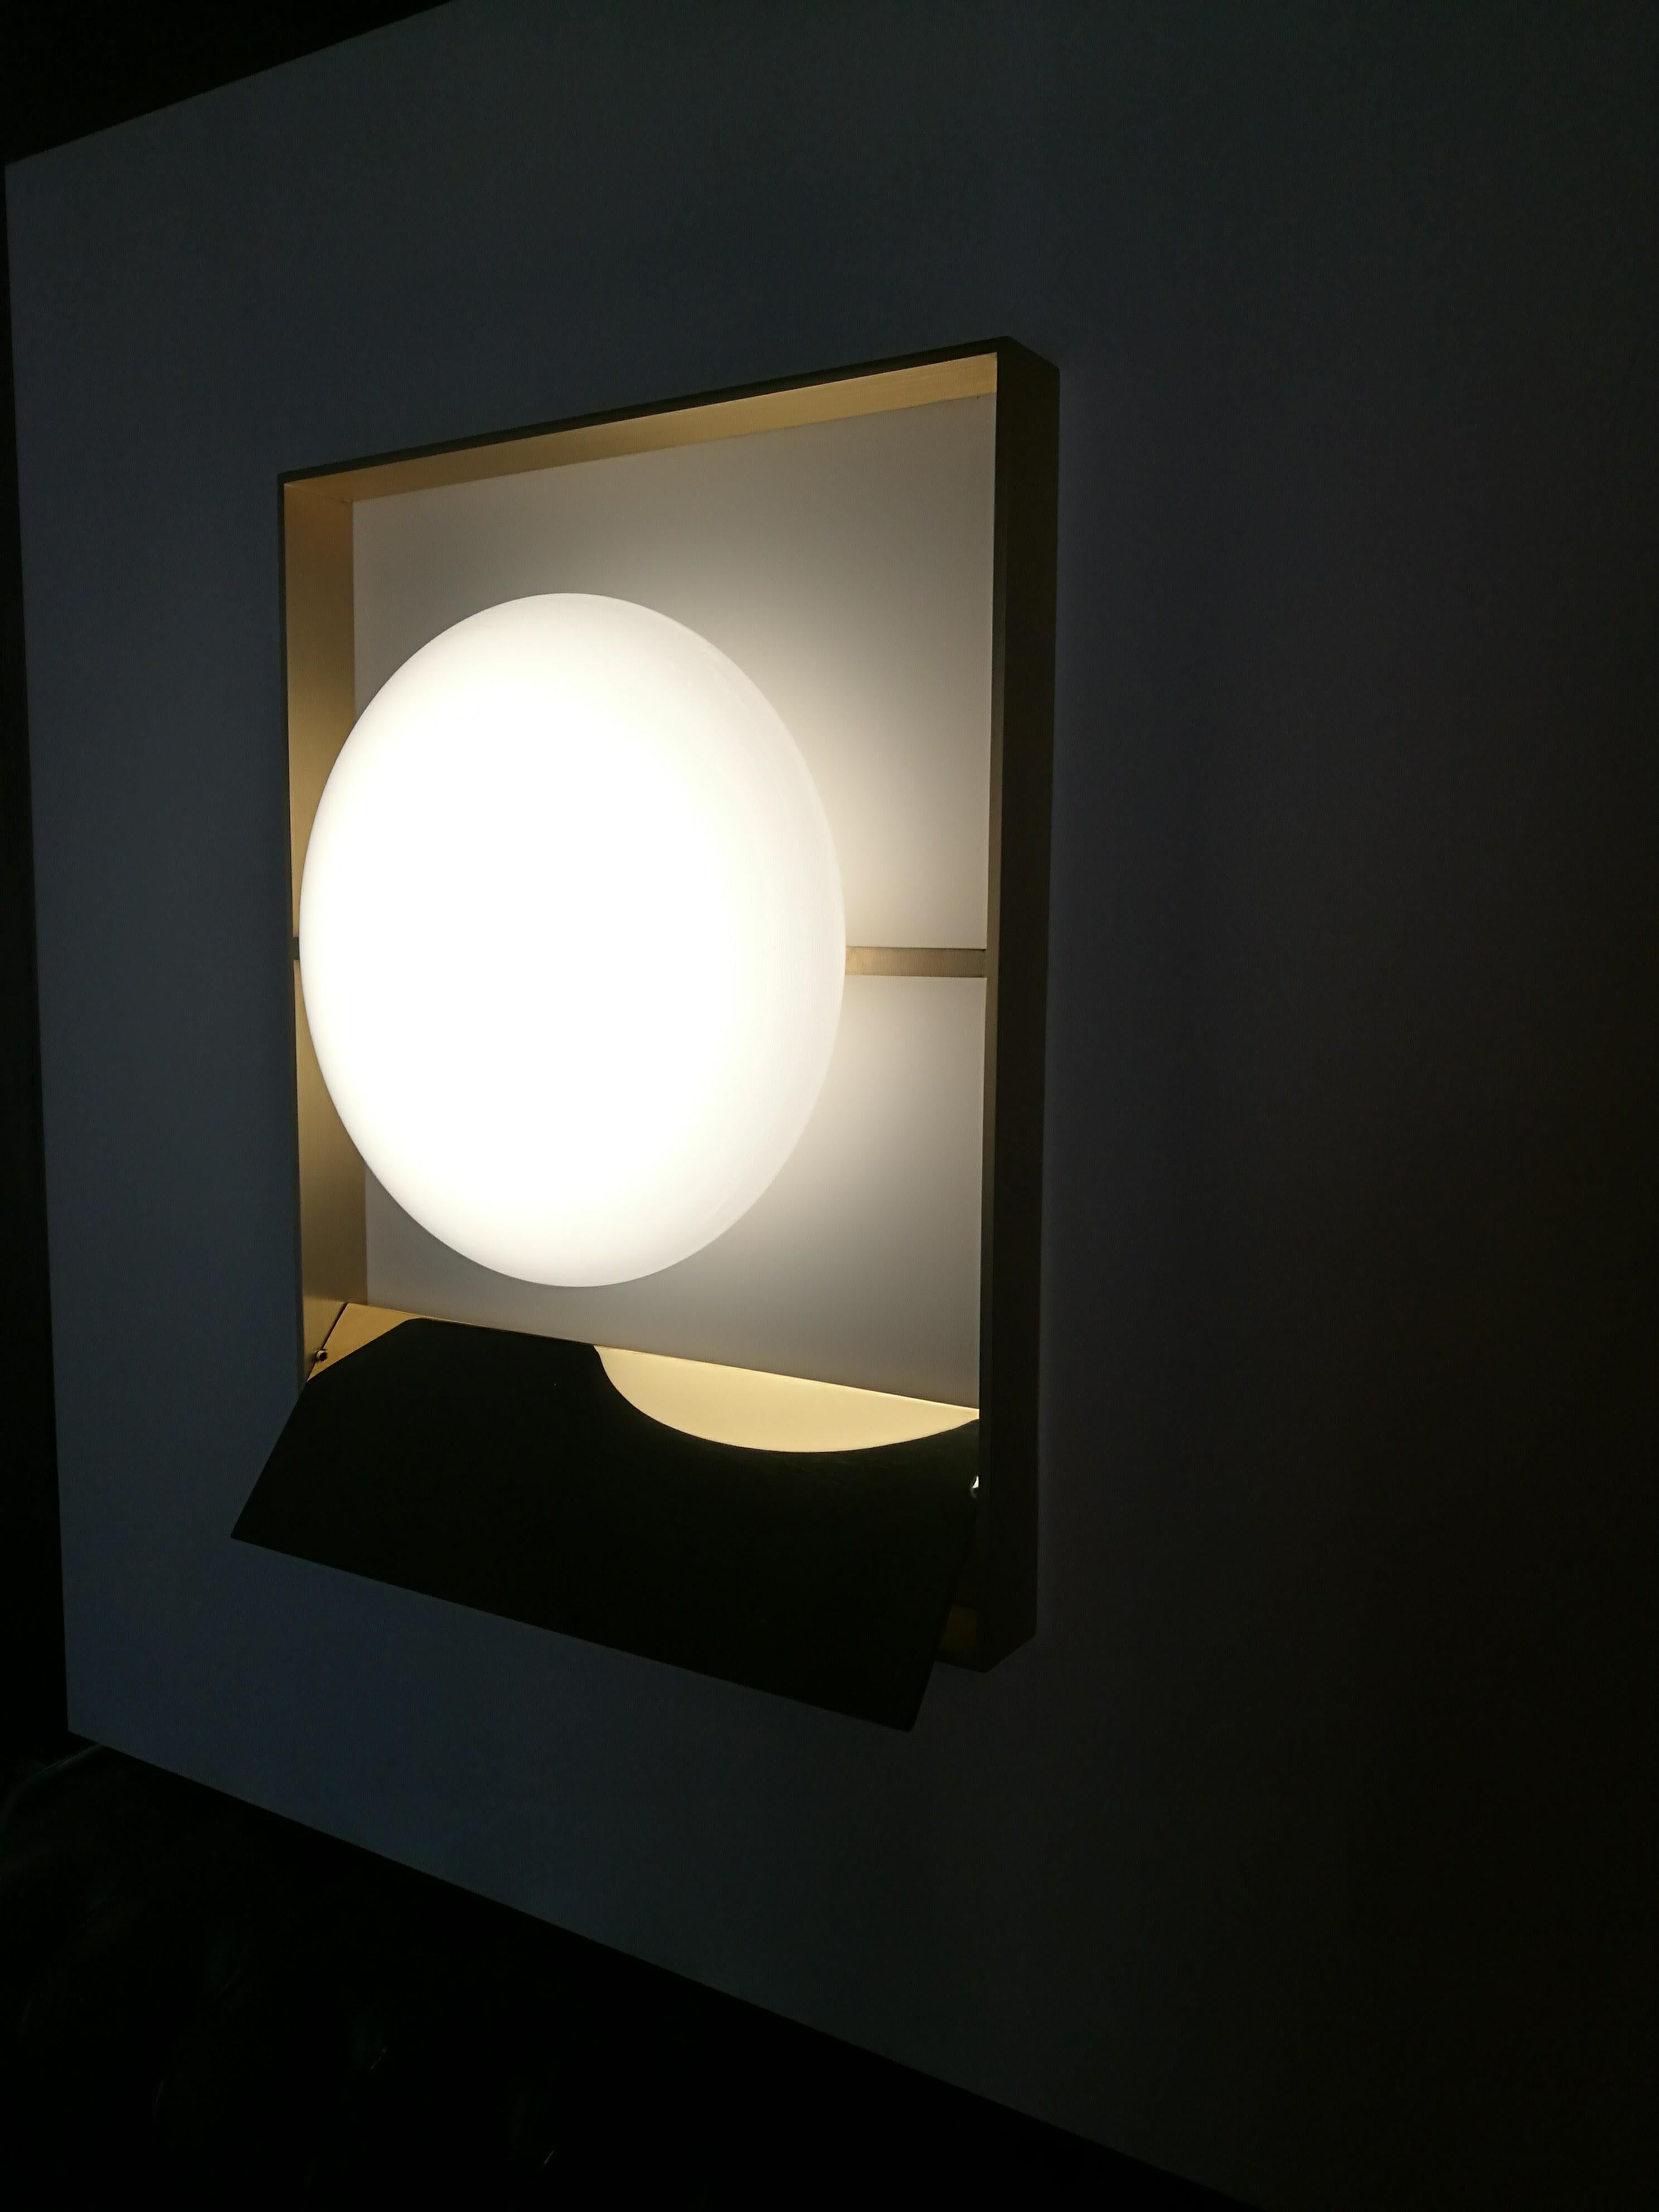 Lampada 12 by Hagit Pincovici

Wall sconce
Measures: 10.7